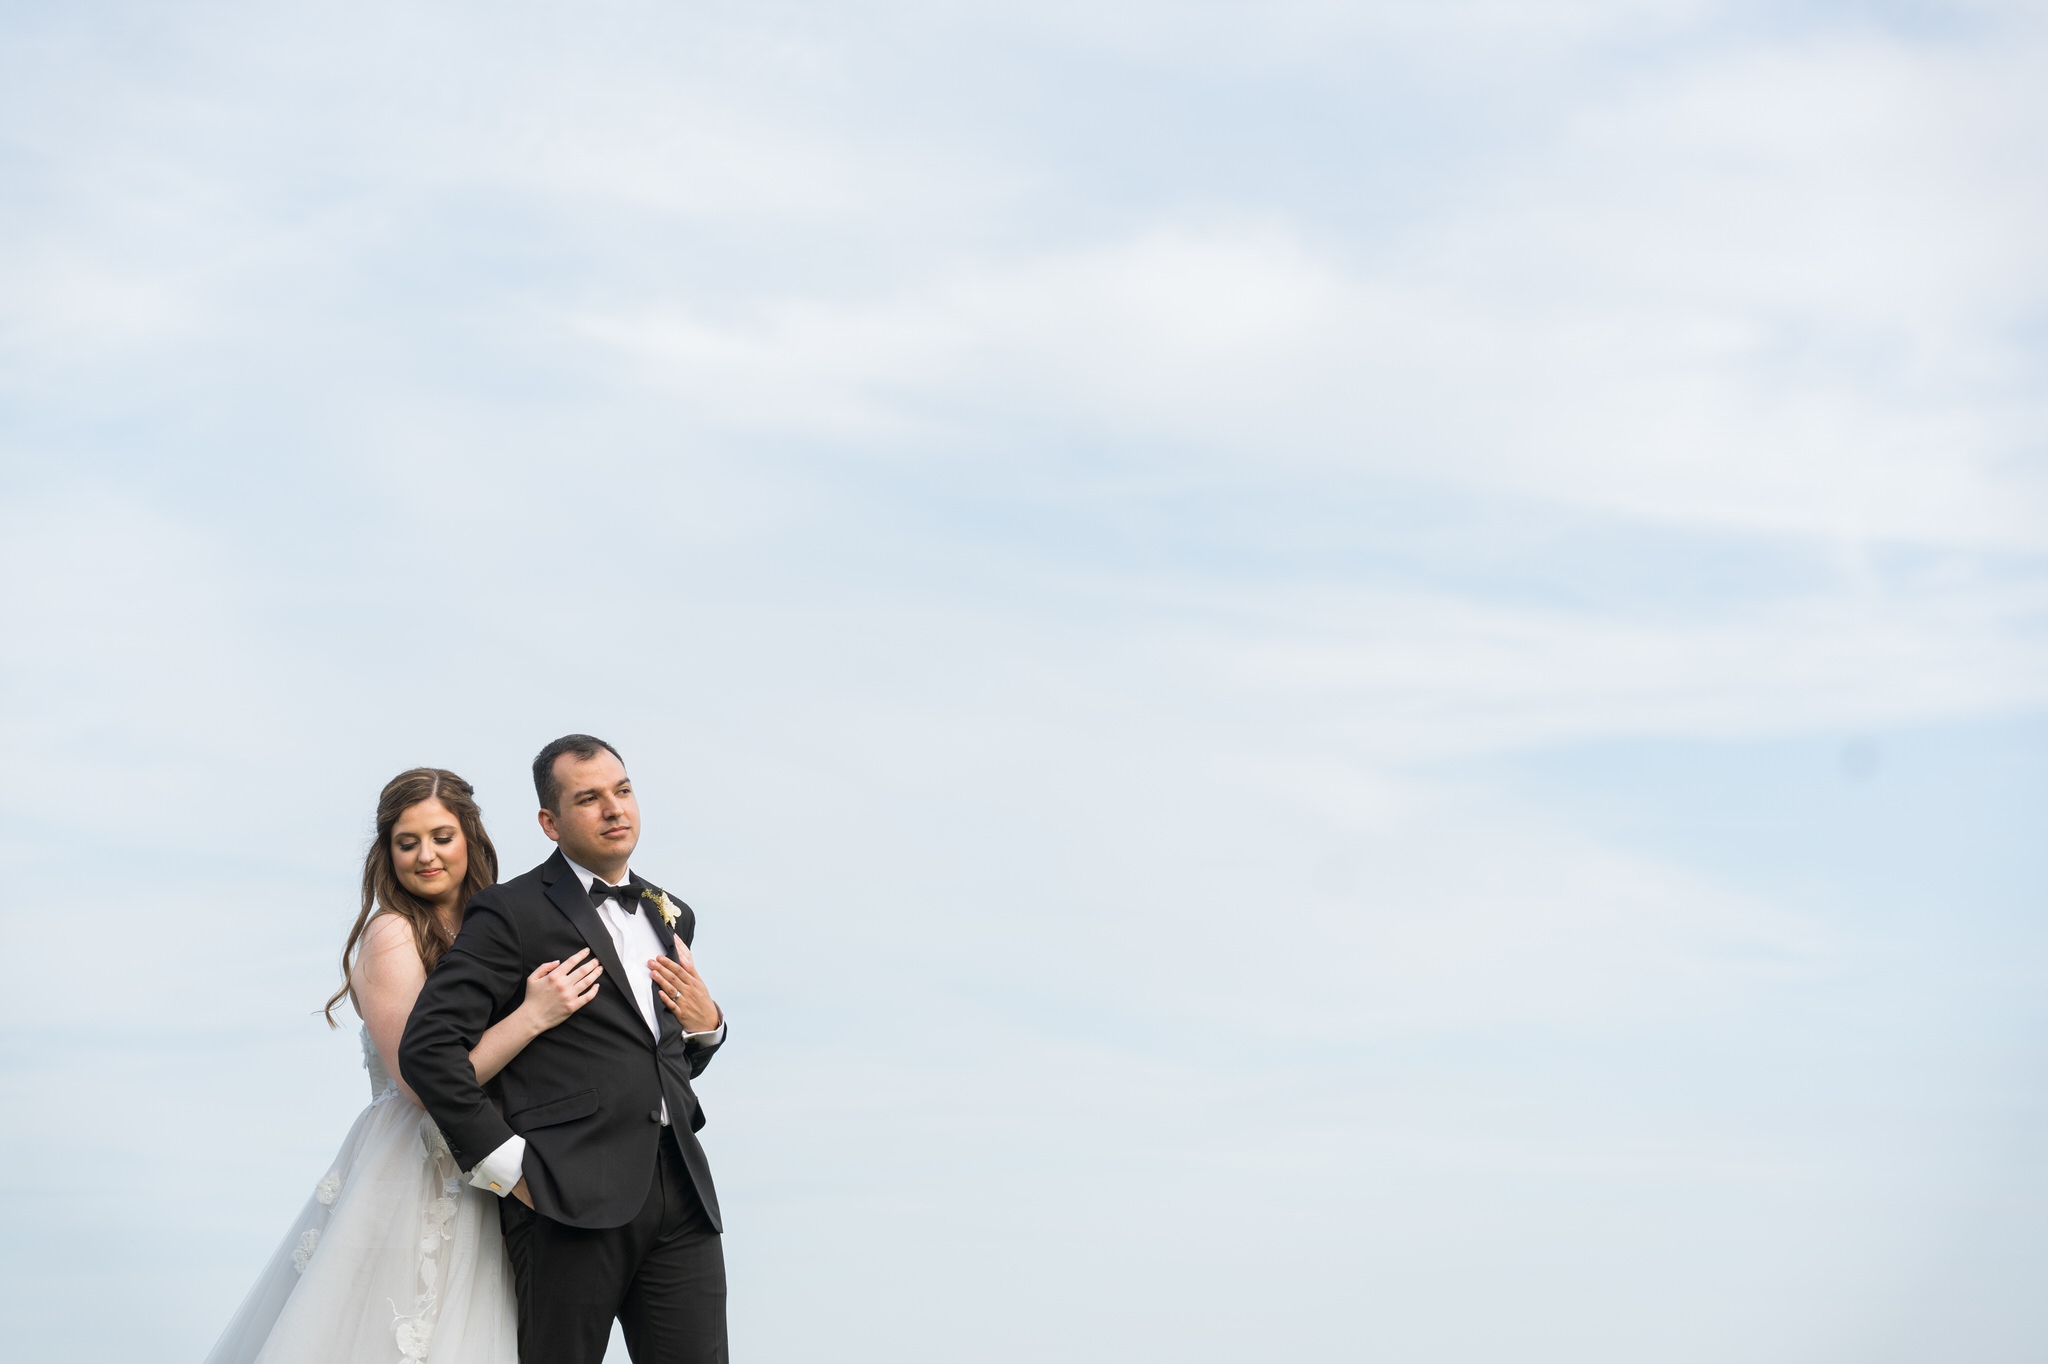 The bride and groom  are photographed against a blue sky during their wedding at The War Memorial.  